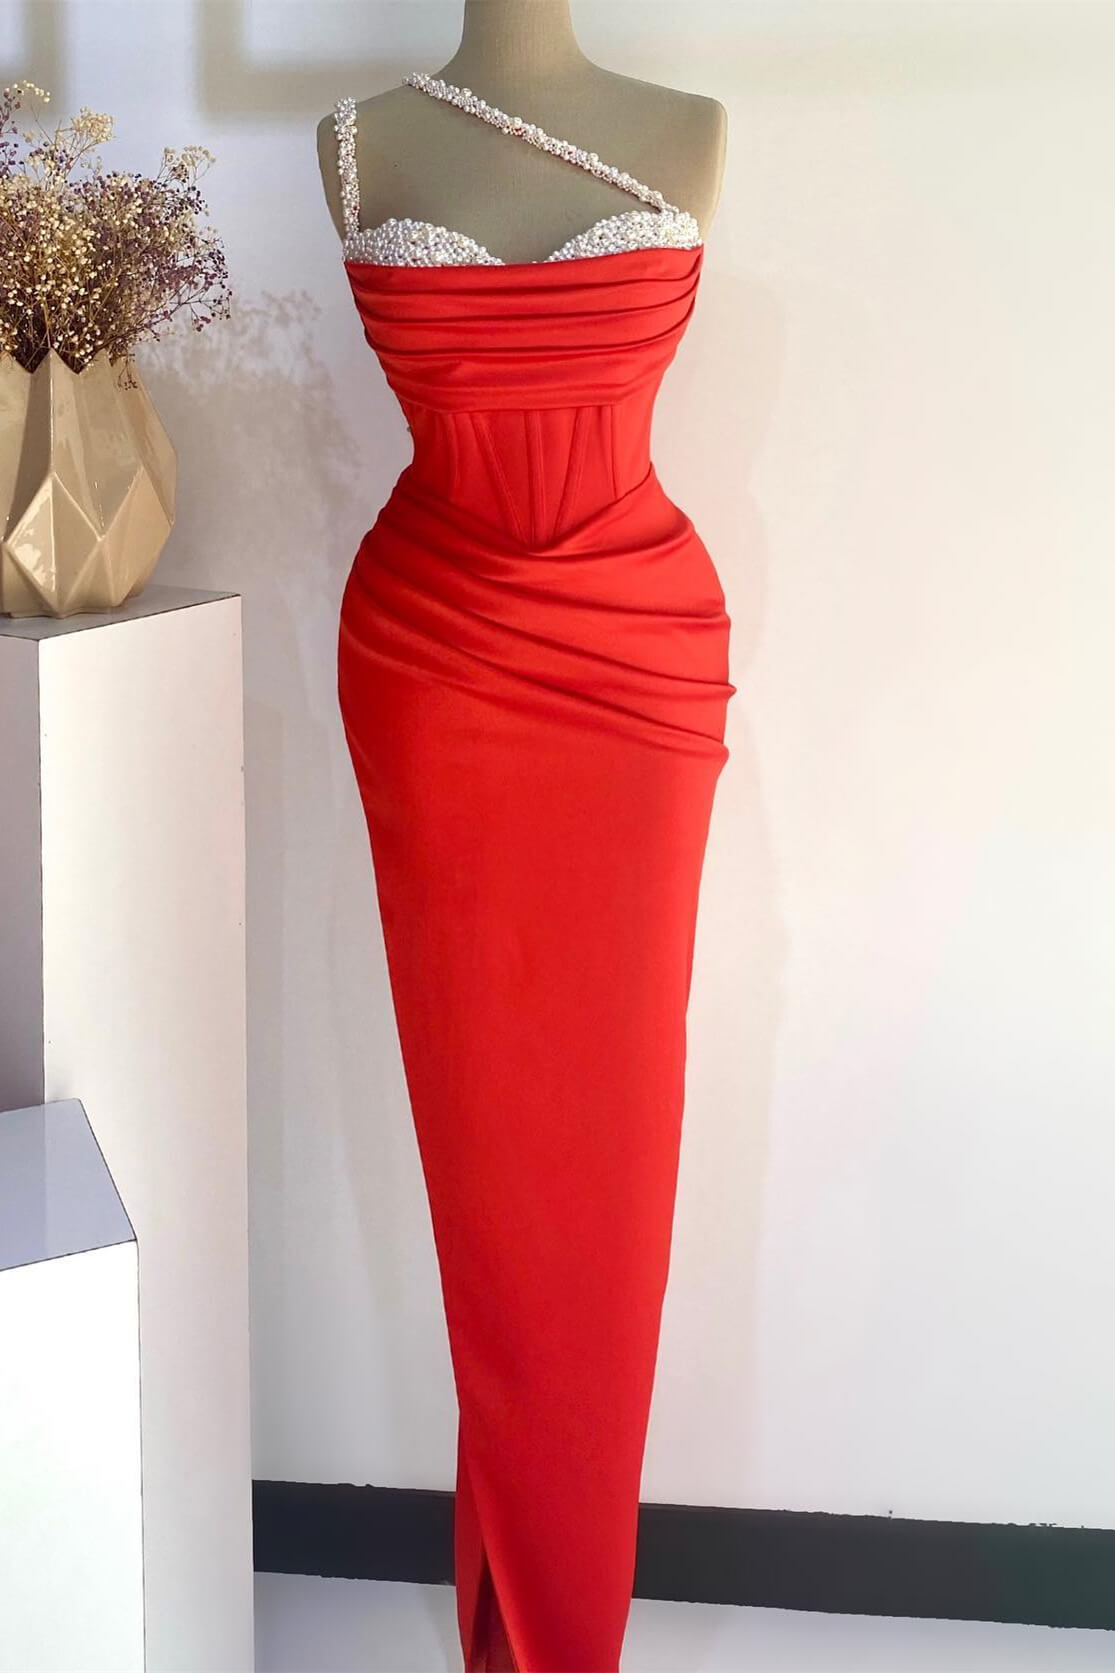 Chic Red One Shoulder Sleeveless Mermaid Evening Gown With Pearls Online - lulusllly